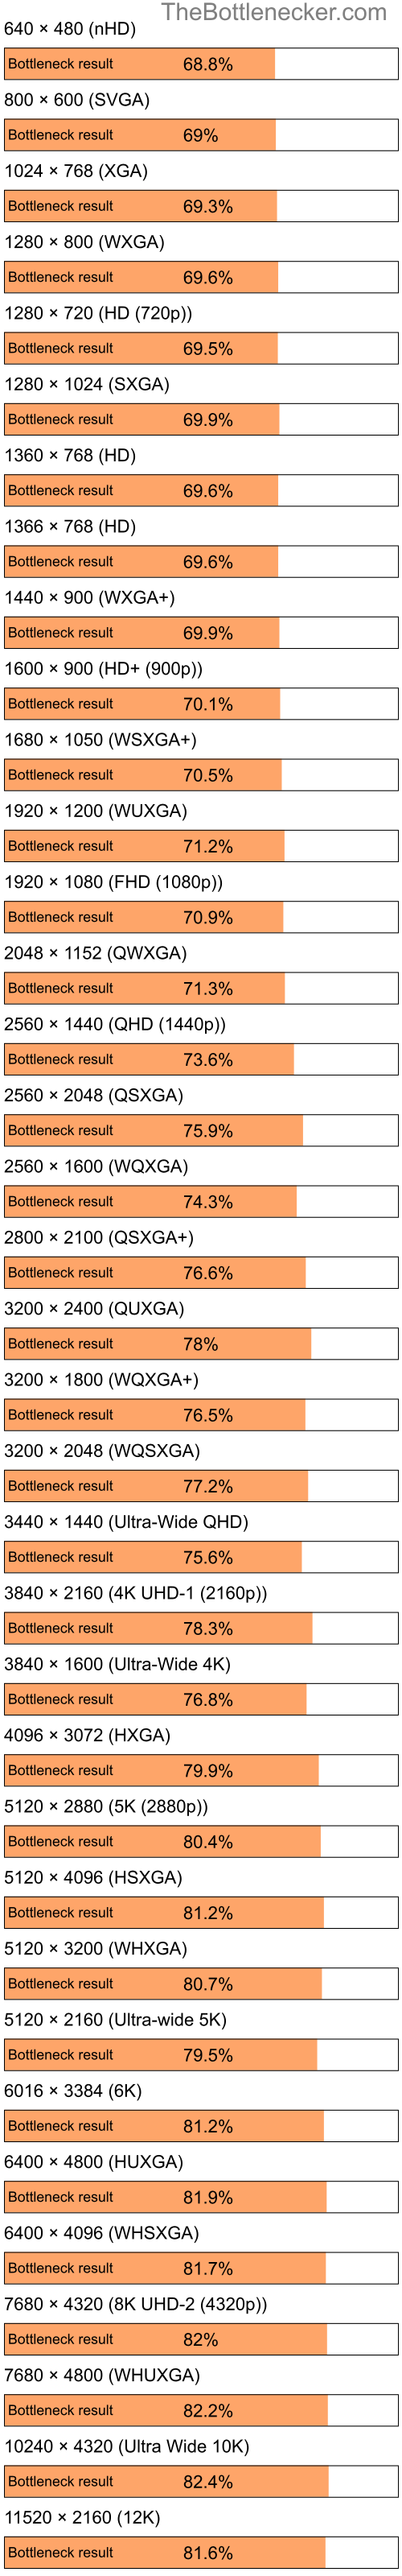 Bottleneck results by resolution for Intel Atom Z520 and AMD M880G with Mobility Radeon HD 4250 in Graphic Card Intense Tasks